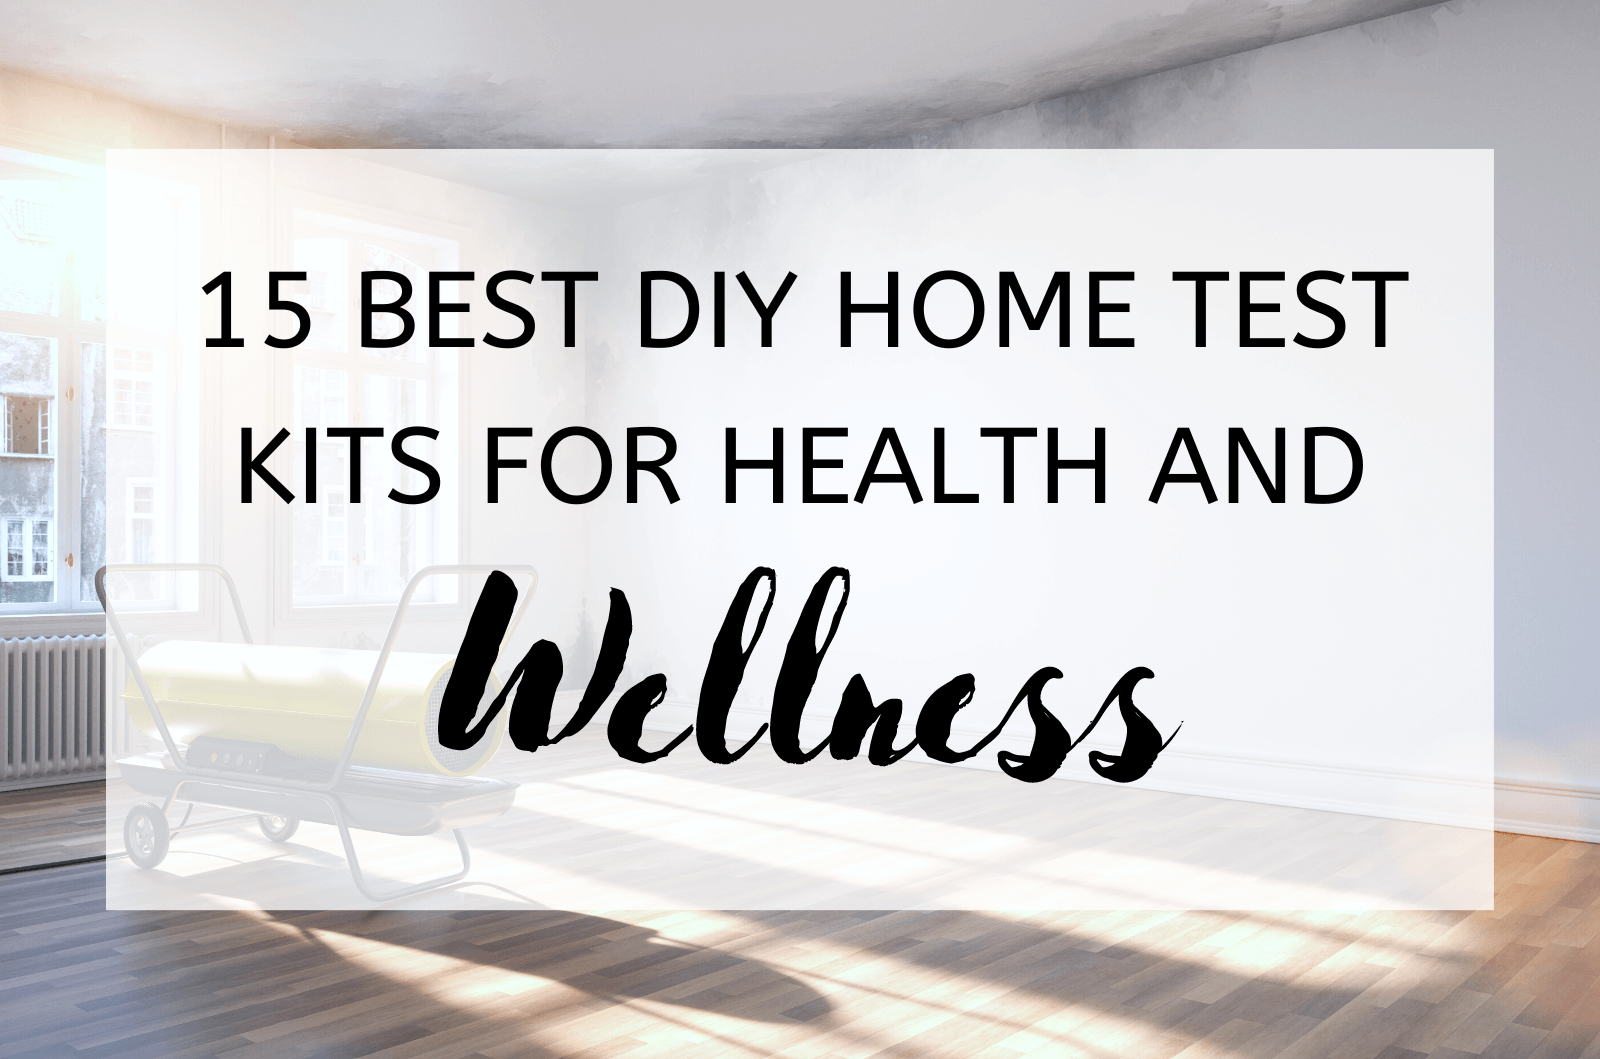 15 Best Diy Home Test Kits For Health And Wellness 